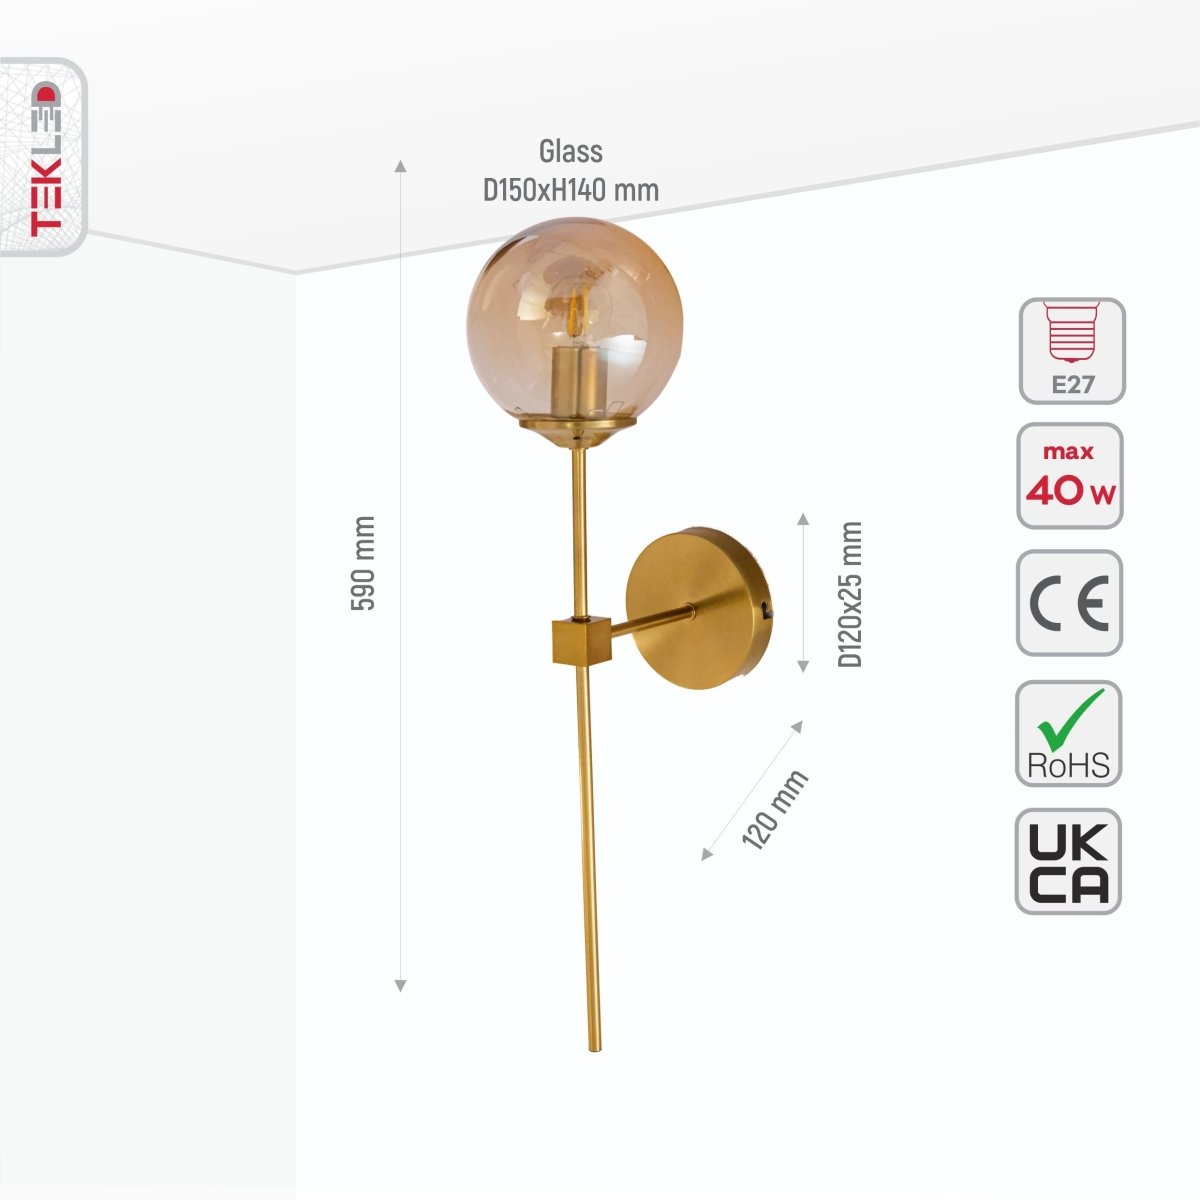 Size and specs of Amber Glass Gold Metal Wall Light L with E27 Fitting | TEKLED 151-19728